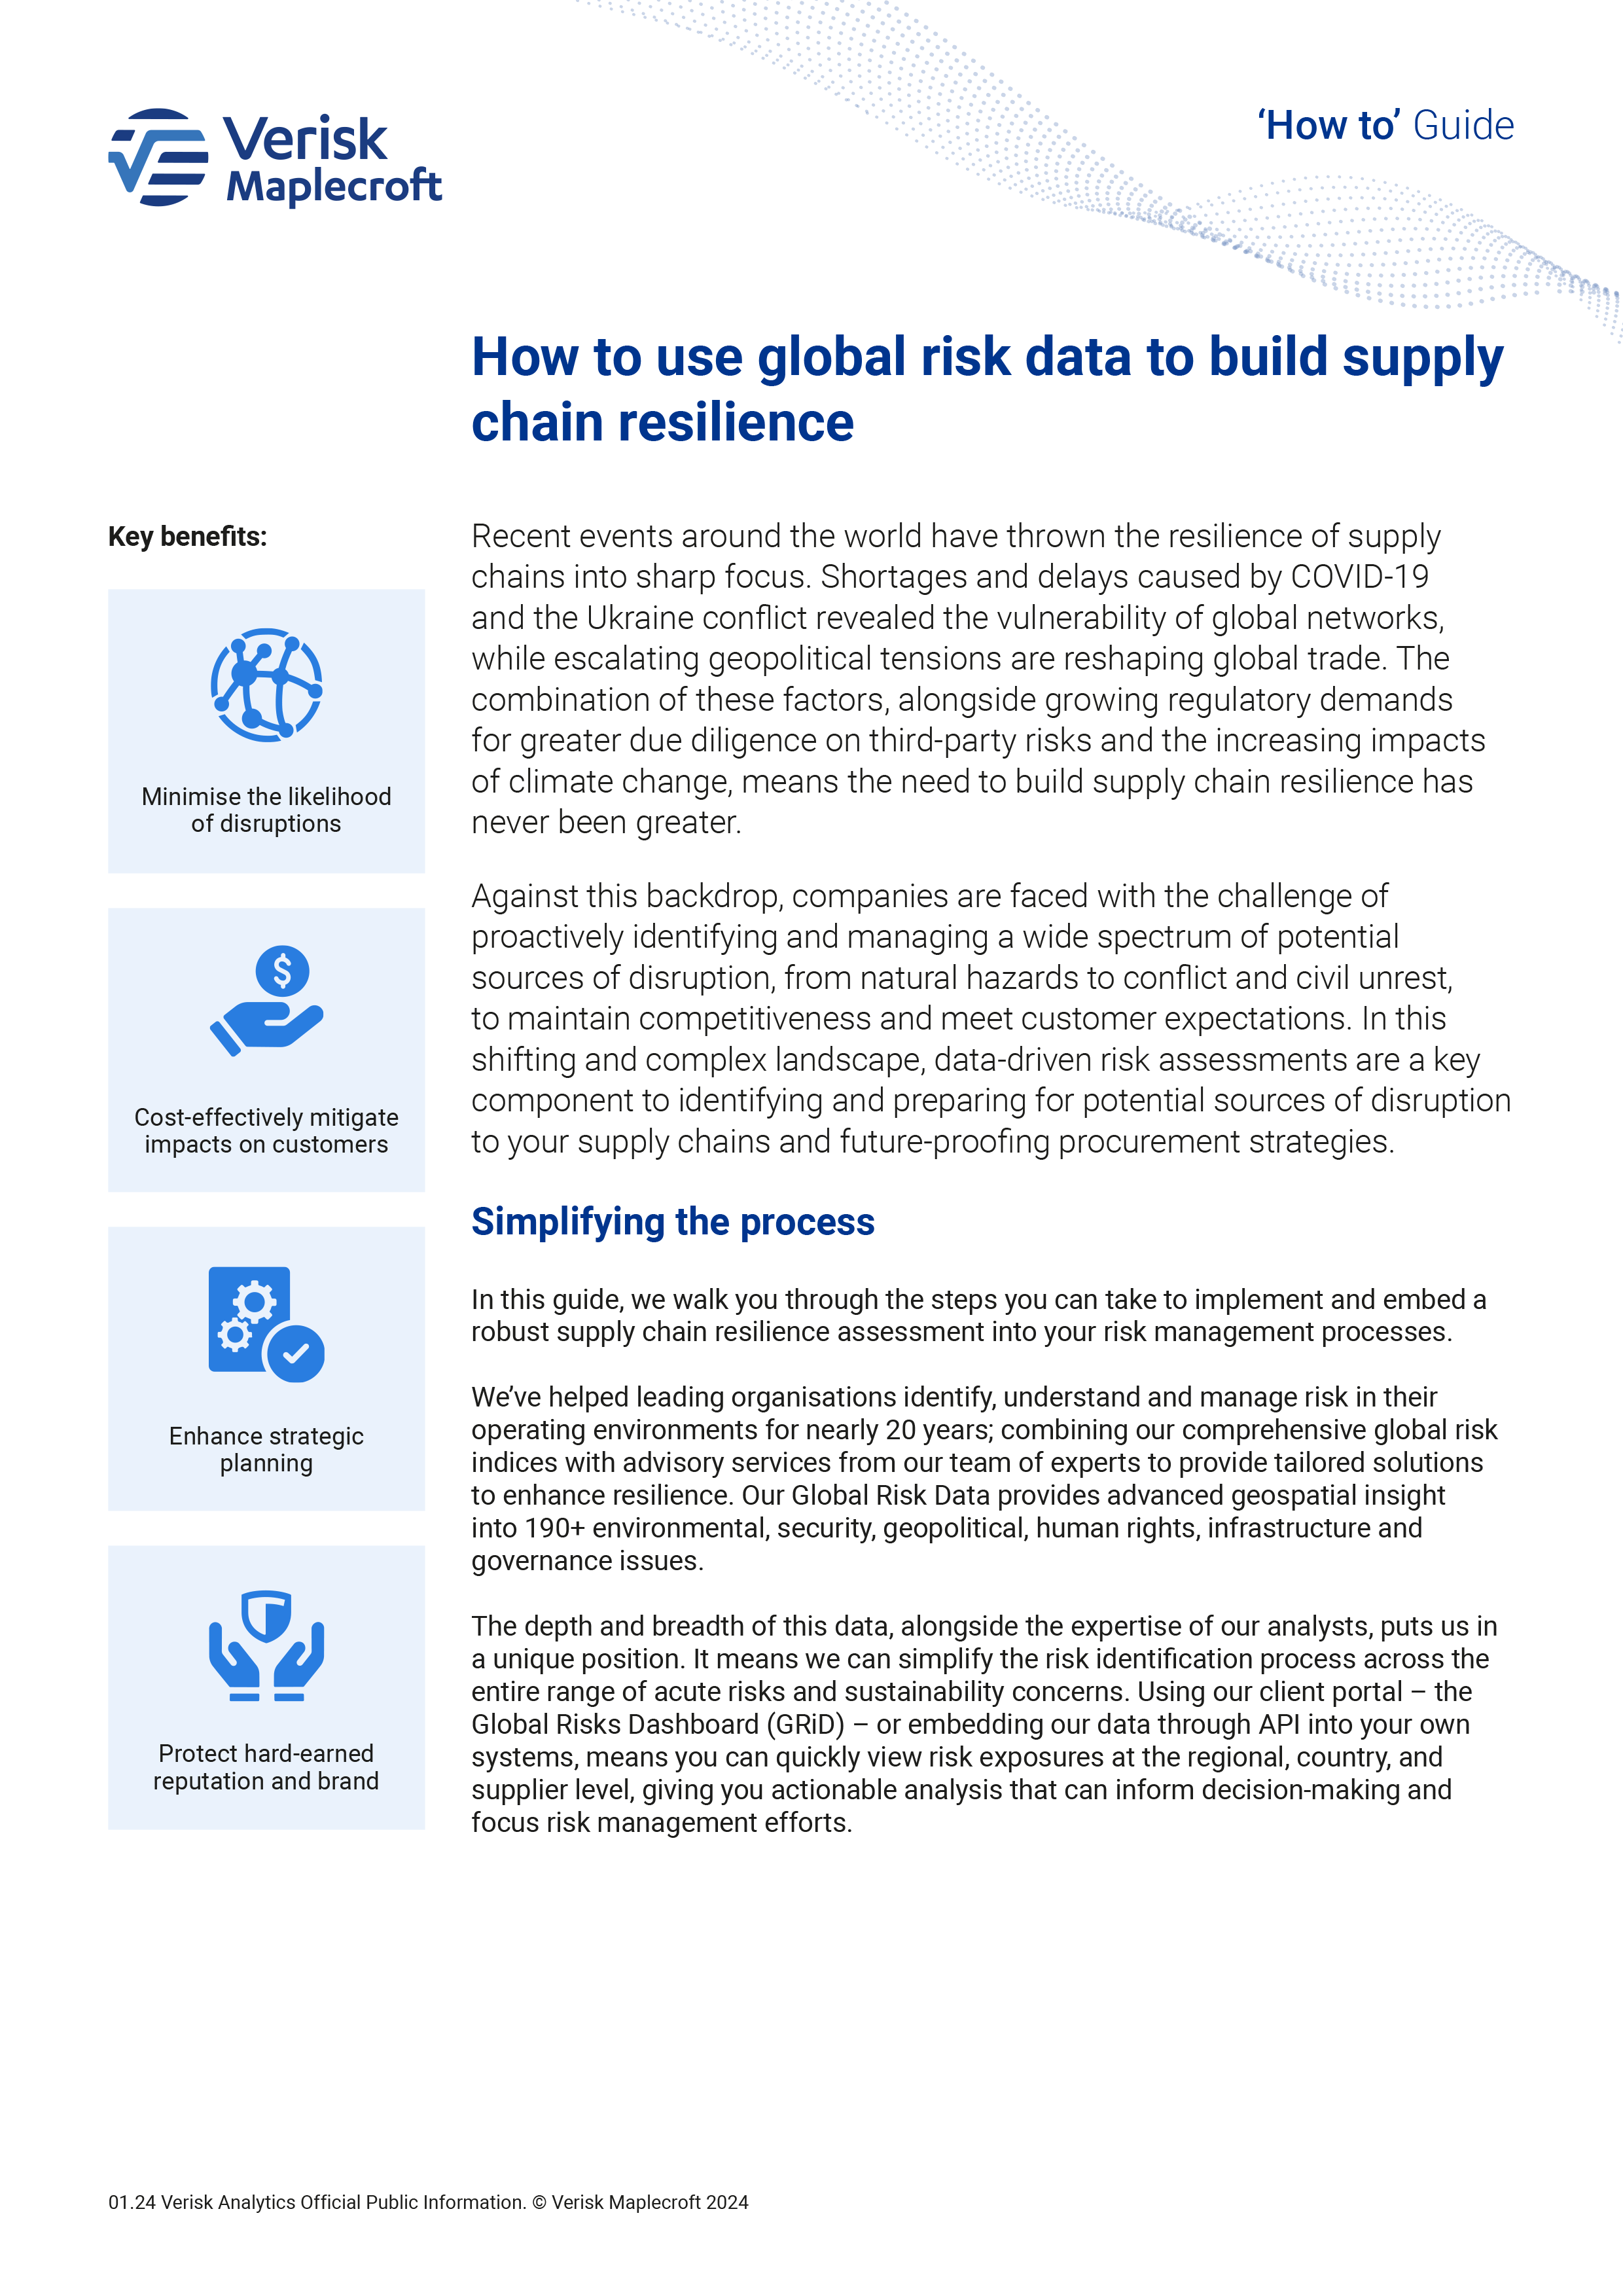 How to use global risk data to build supply chain resilience guide image